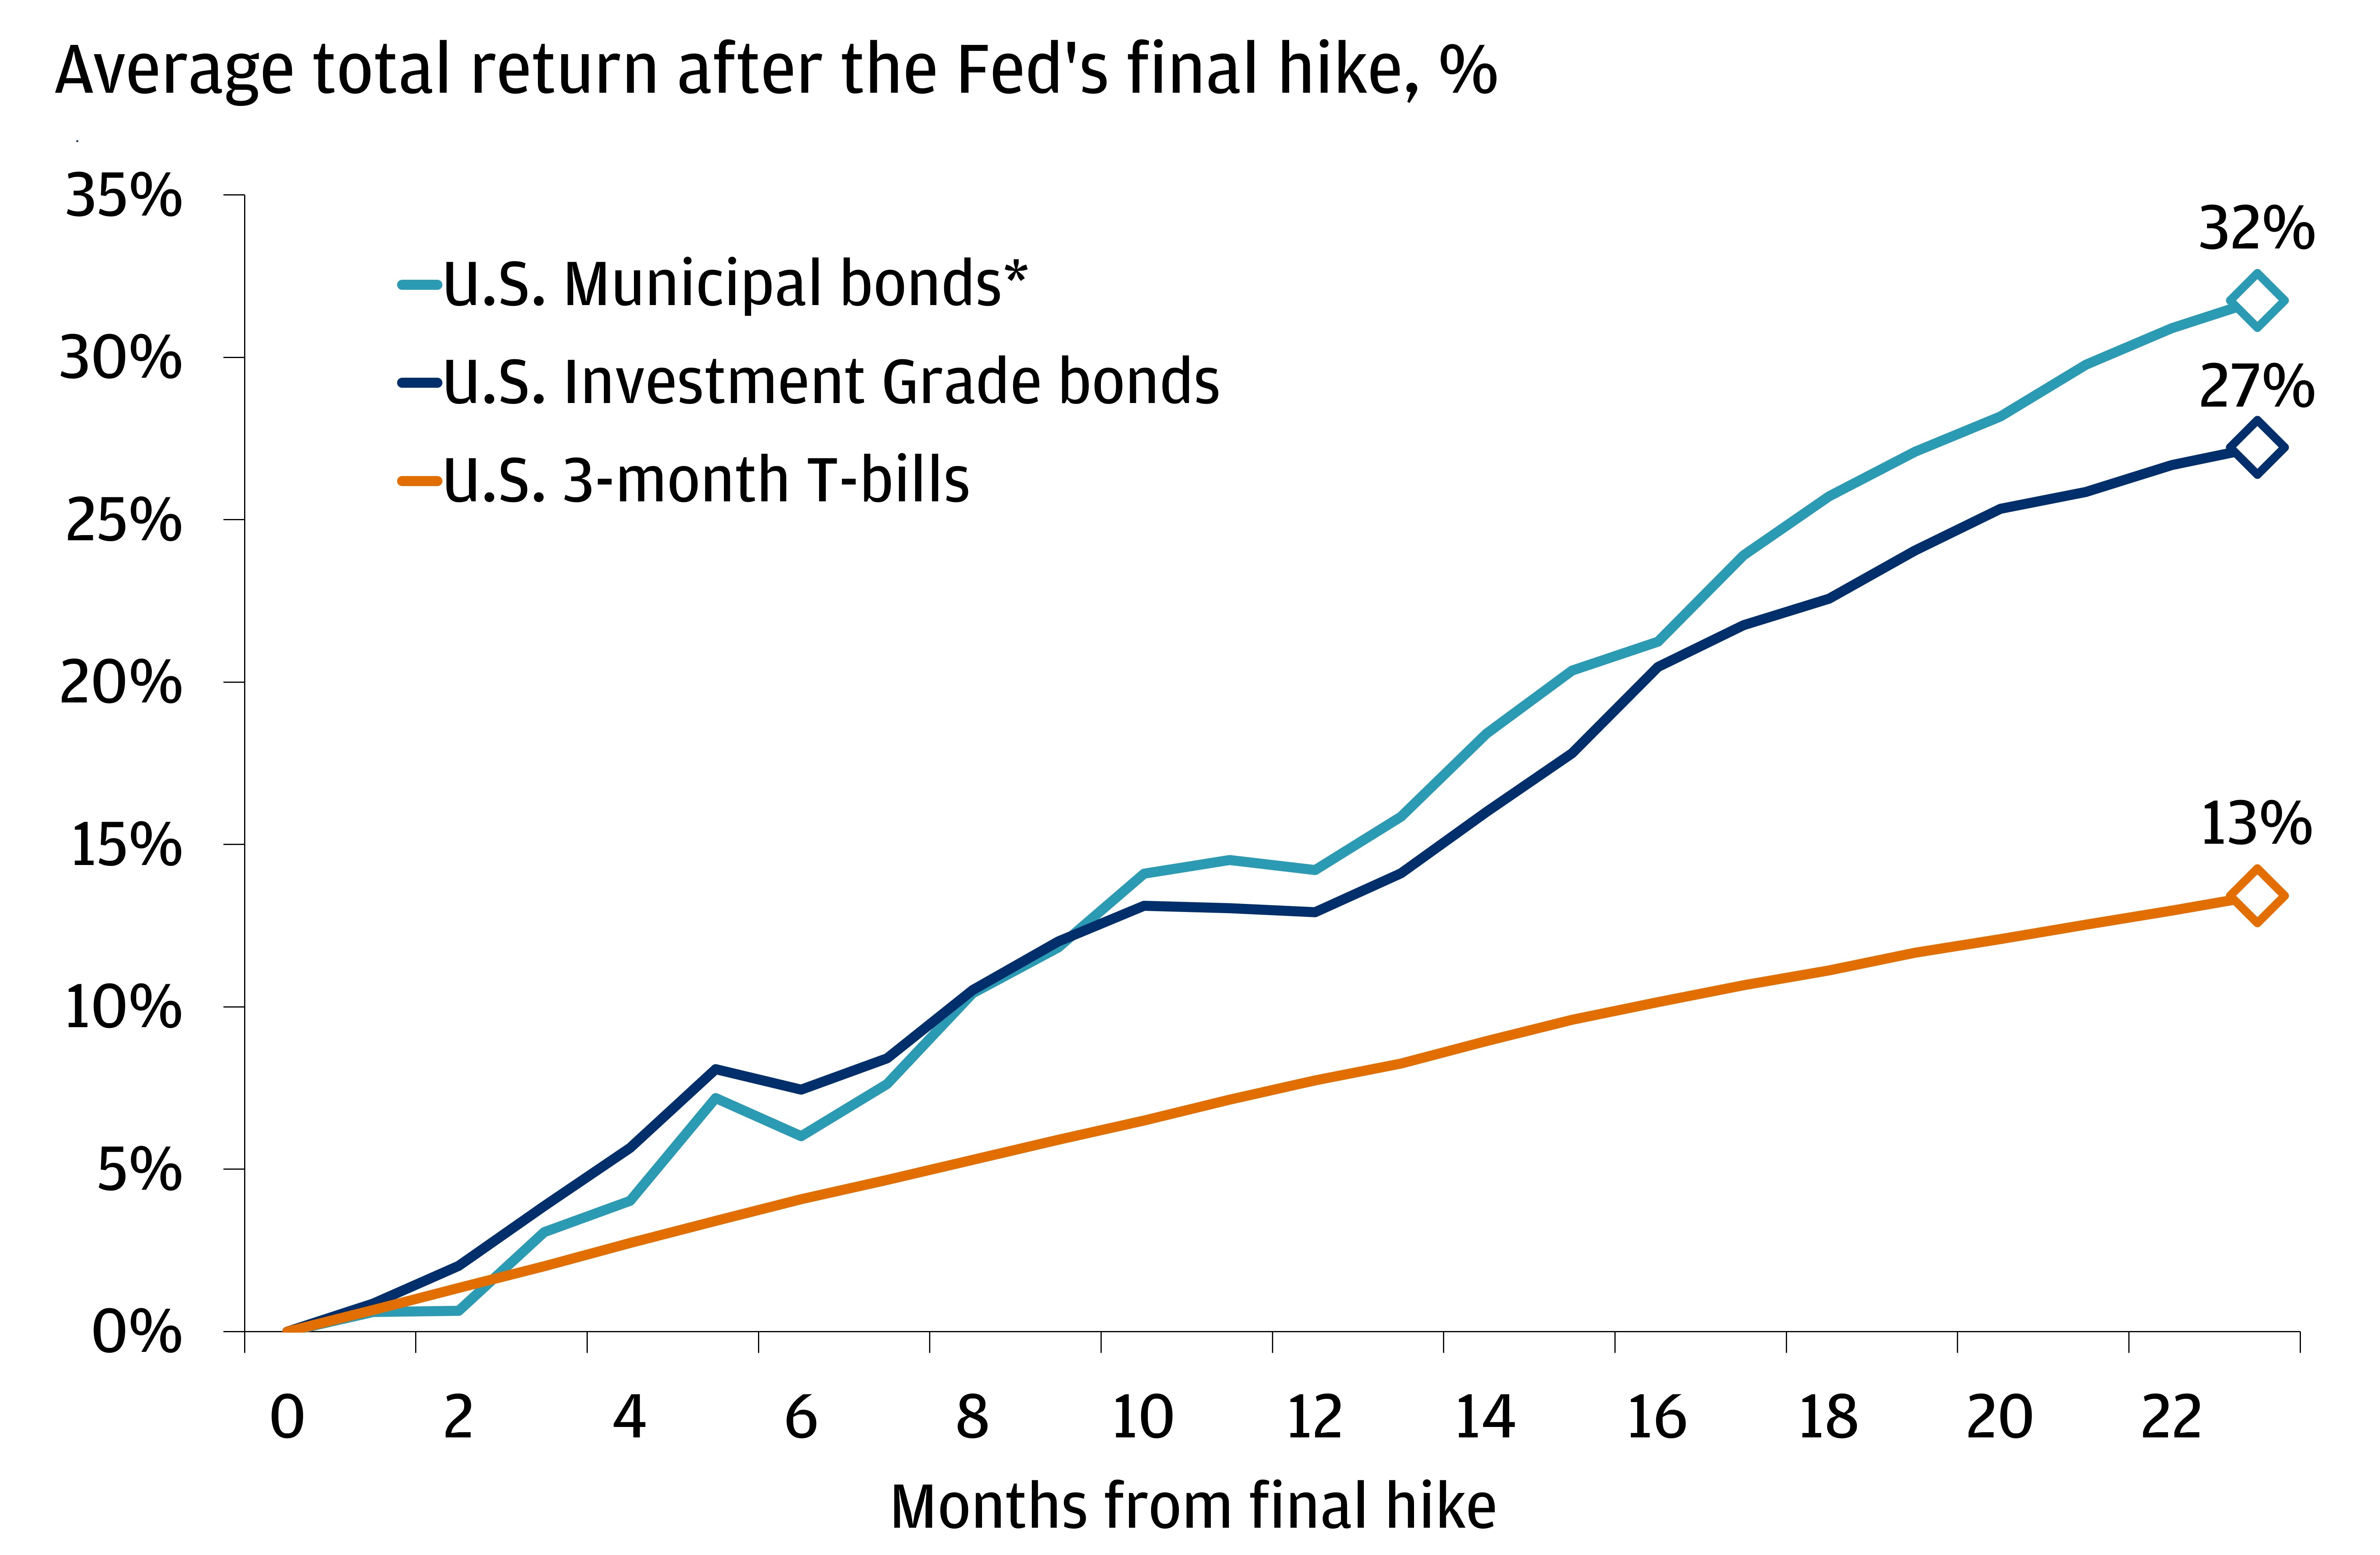 This chart describes the average % total return after the Fed’s final hike for U.S. municipal bonds, U.S. investment grade bonds and U.S. 3-month T-bills.